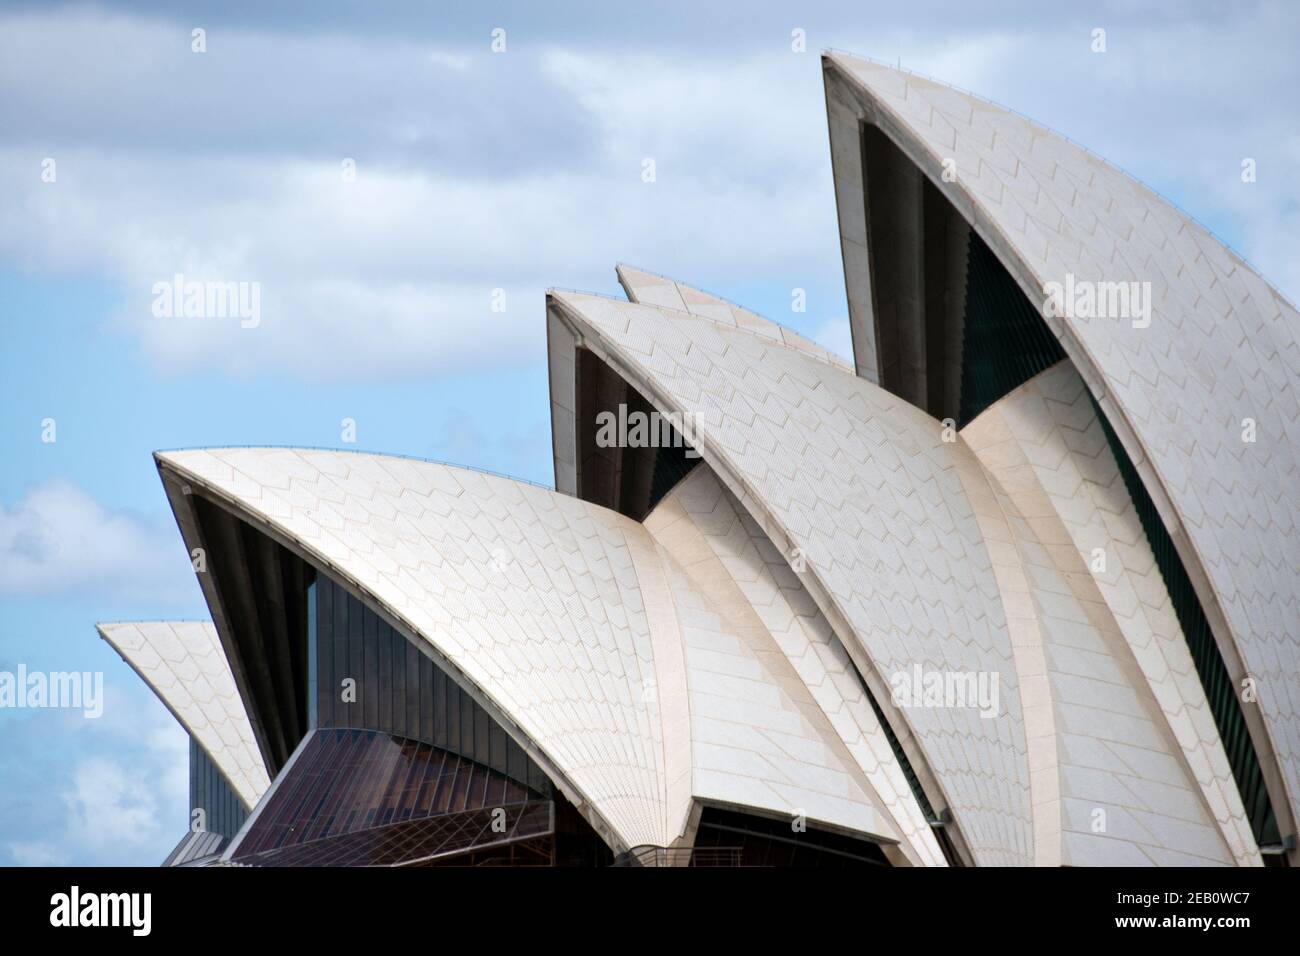 The “shells” of the Sydney Opera House, covered with white tiles ...